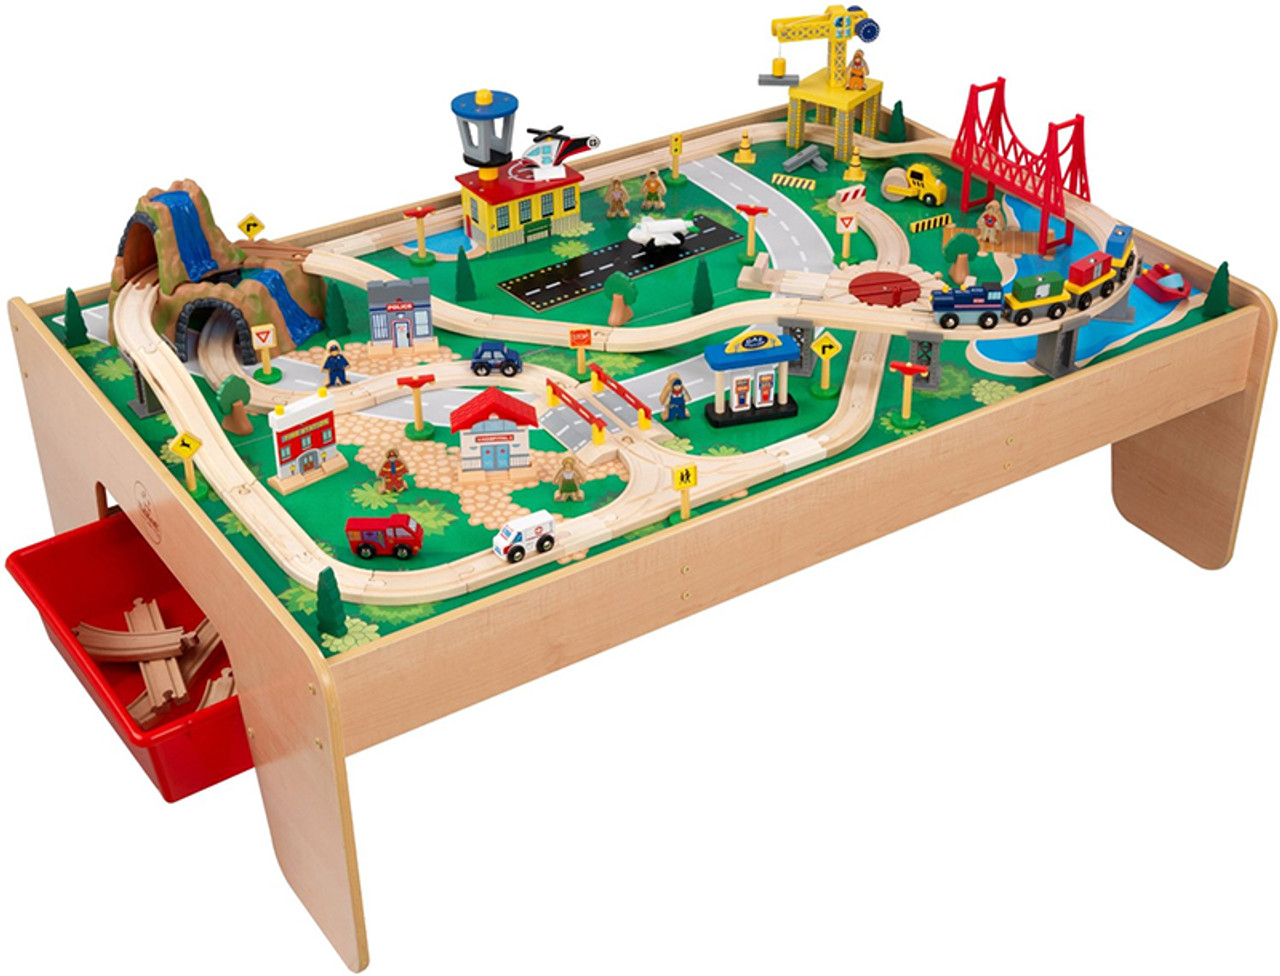 Kidkraft Train Table On Sale Sydney Pickup Or Fast Shipping